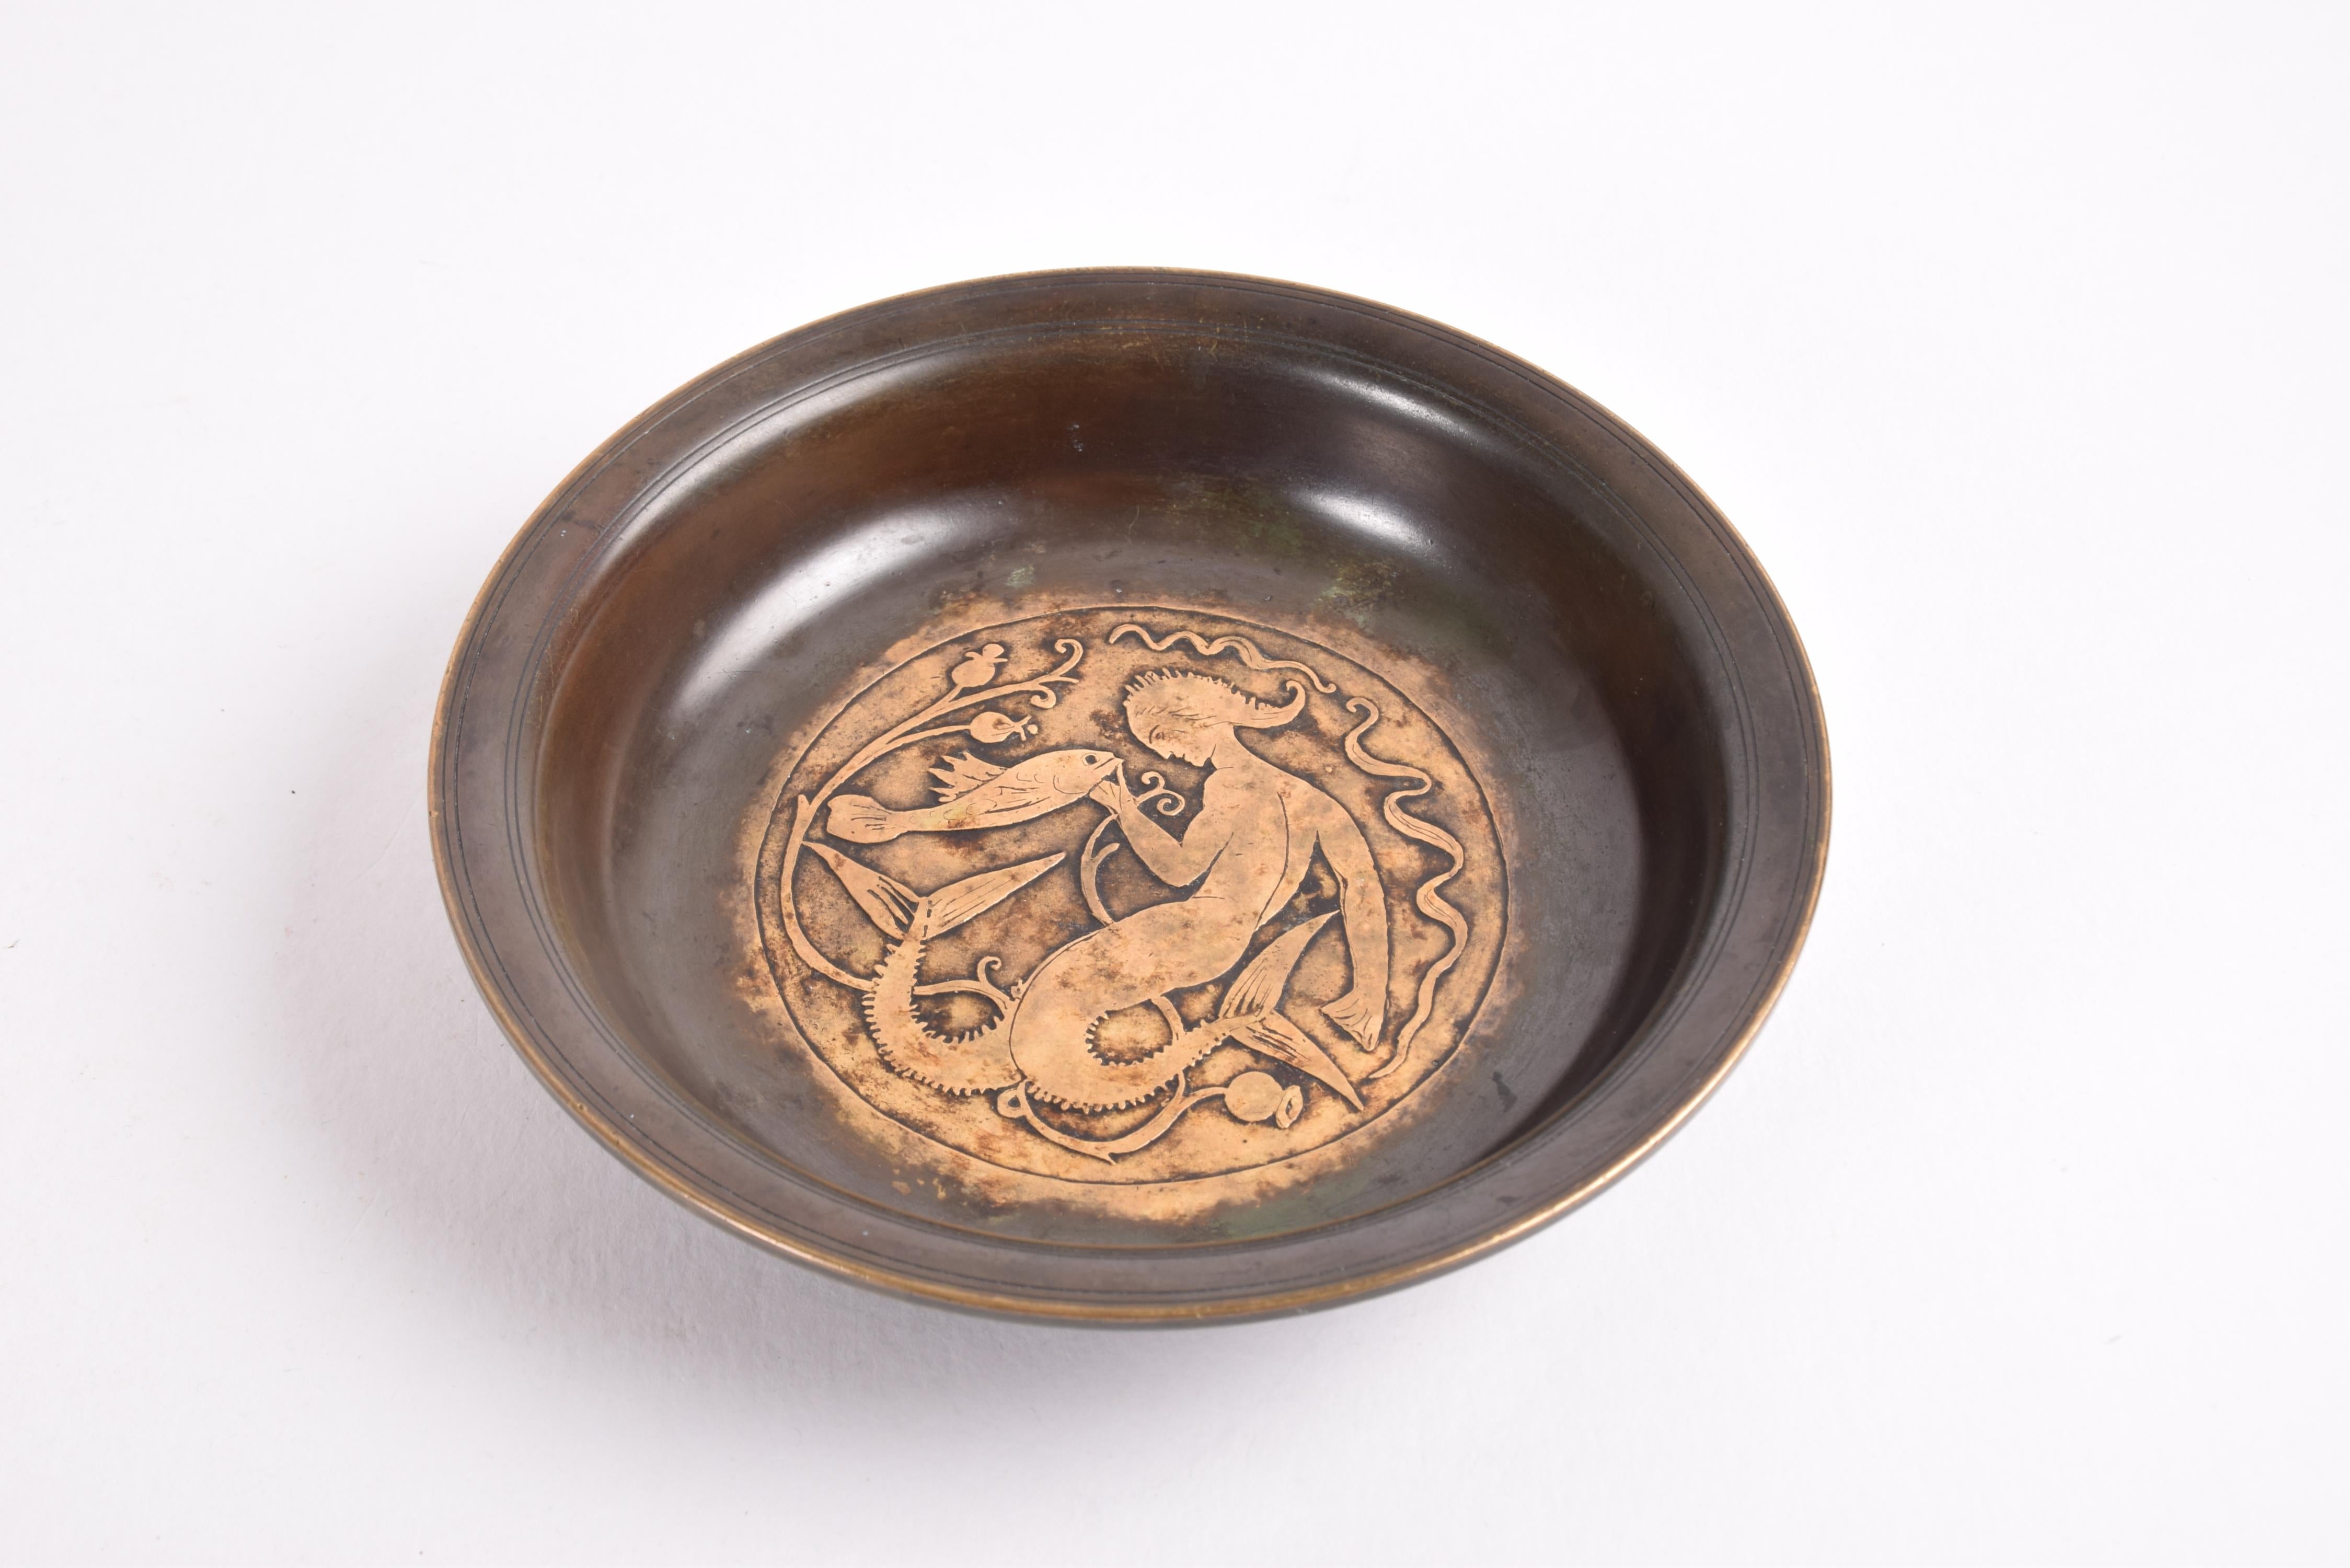 Decorative Art Deco dish from Just Andersen (1884-1943) made in the 1930s. It's made from bronze with brown patina.
Decorated with a stylized mermaid, a fish and water flowers.

Signed with monogram for Just Andersen and B96.

